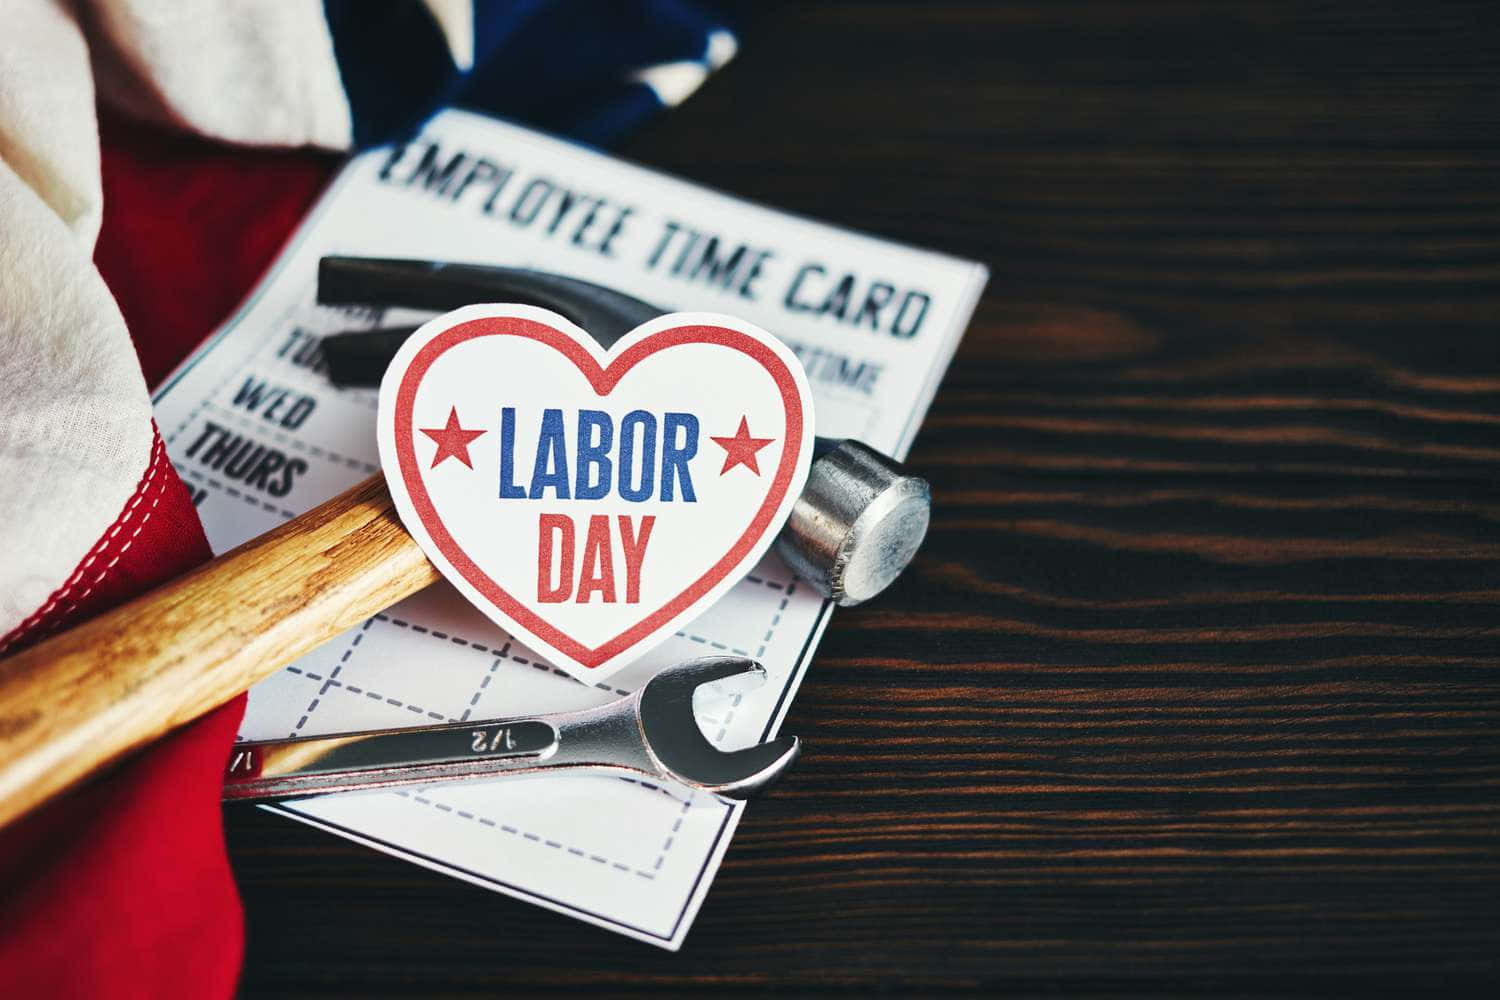 Let's celebrate the hard work of all workers - Happy Labor Day!